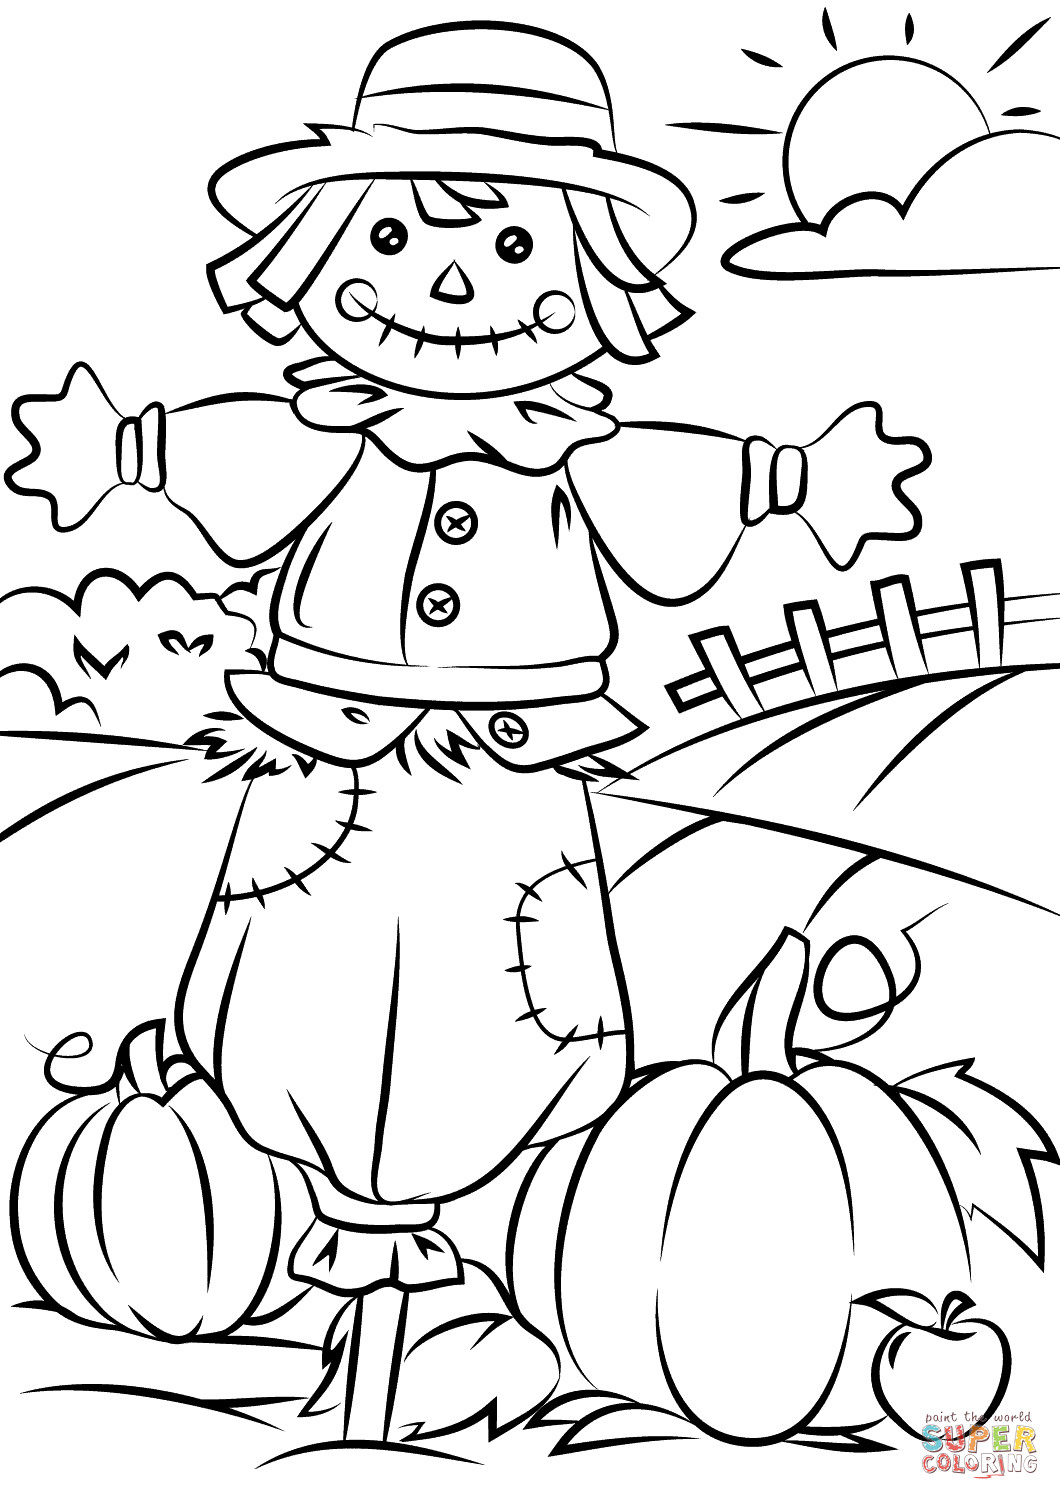 Fall Coloring Pages For Kids
 Autumn Scene with Scarecrow coloring page